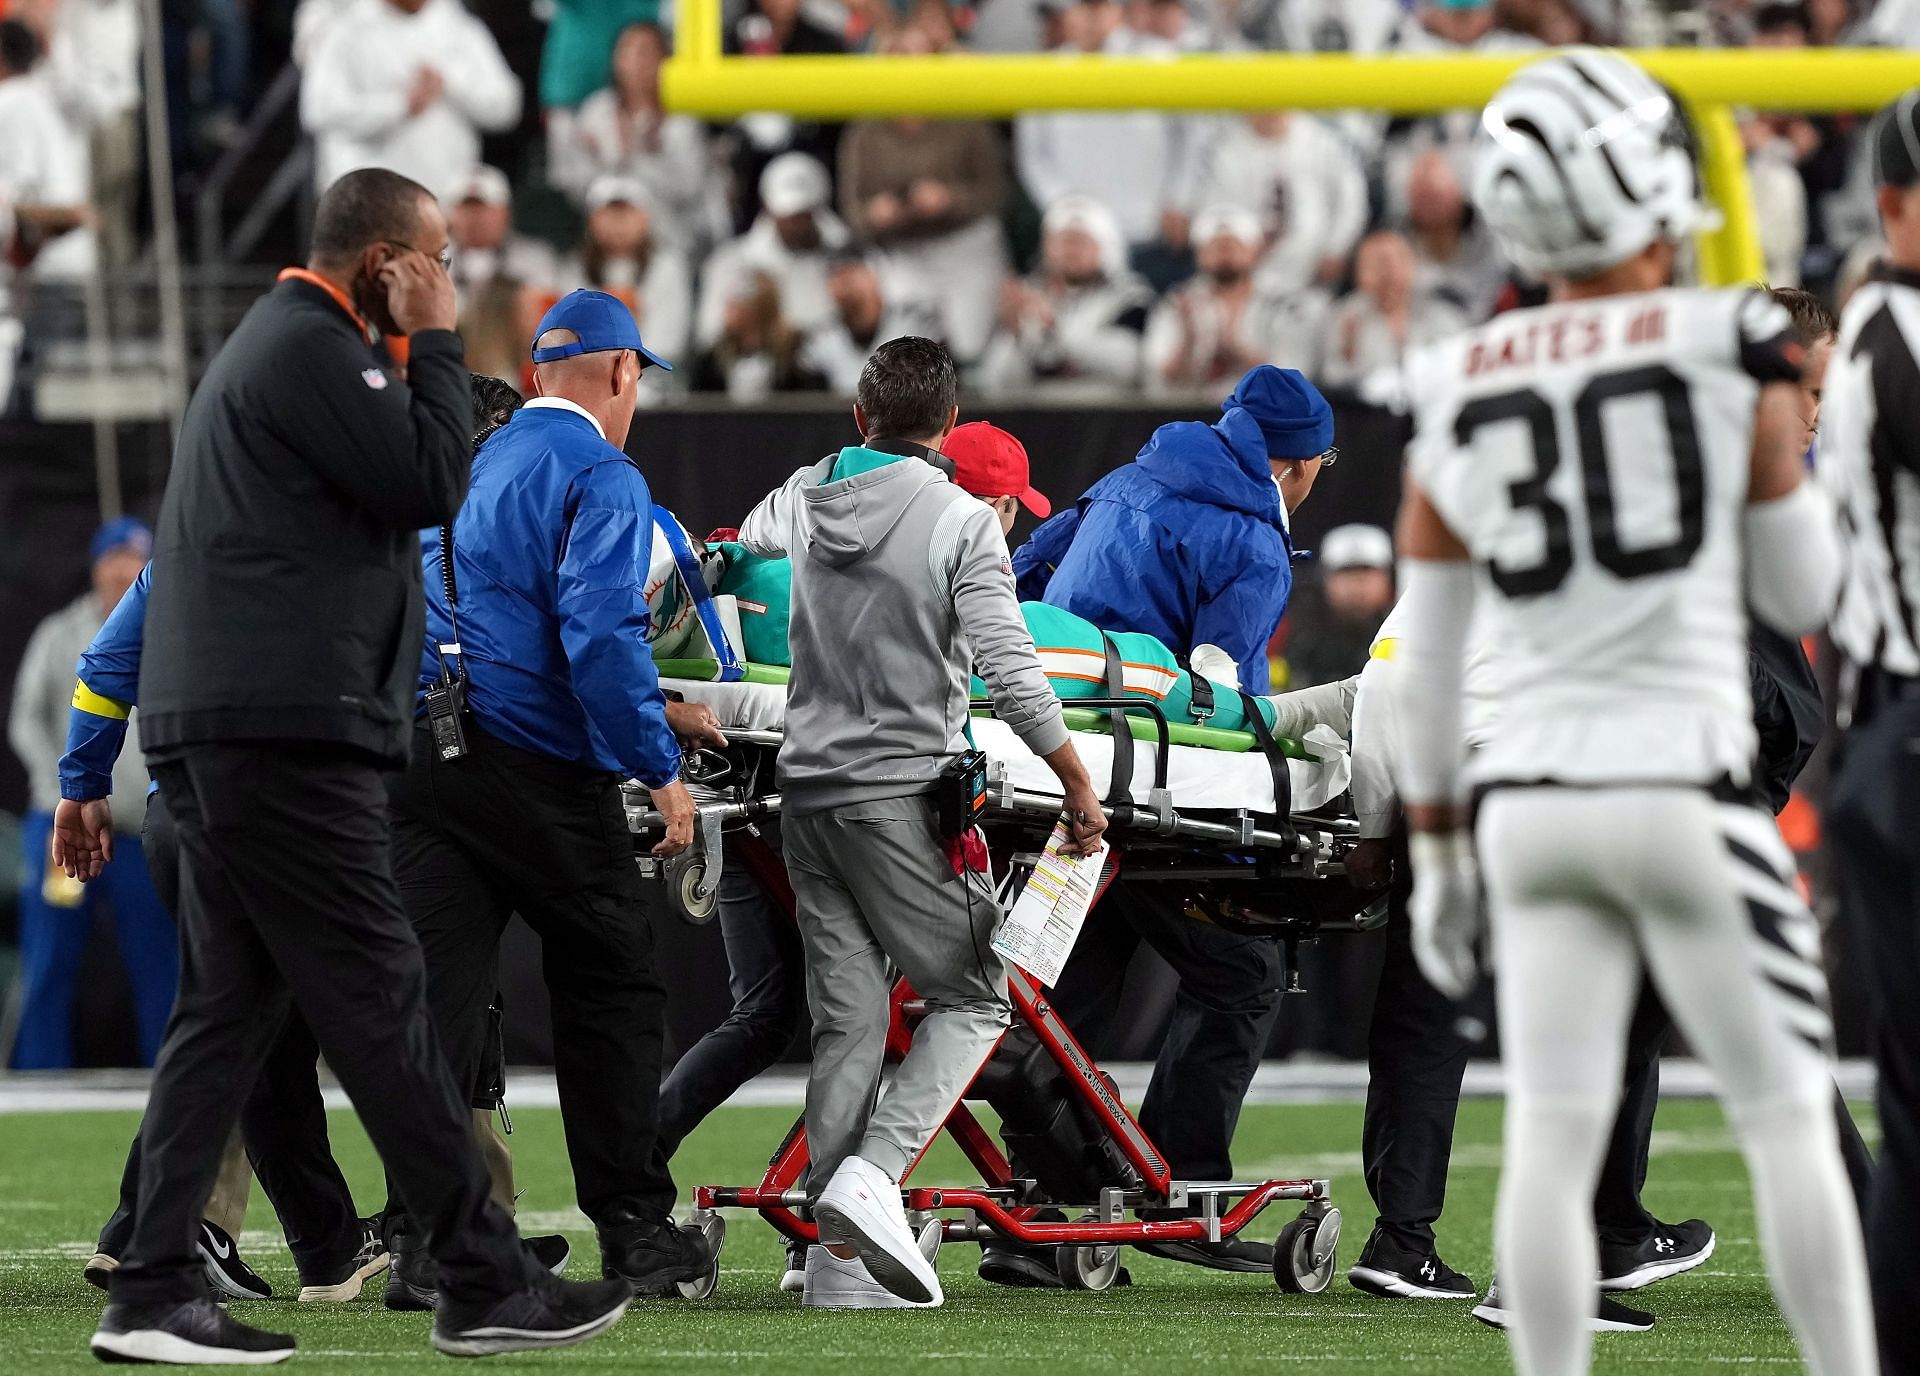 Tua Tagovailoa was taken to a hospital earlier this year